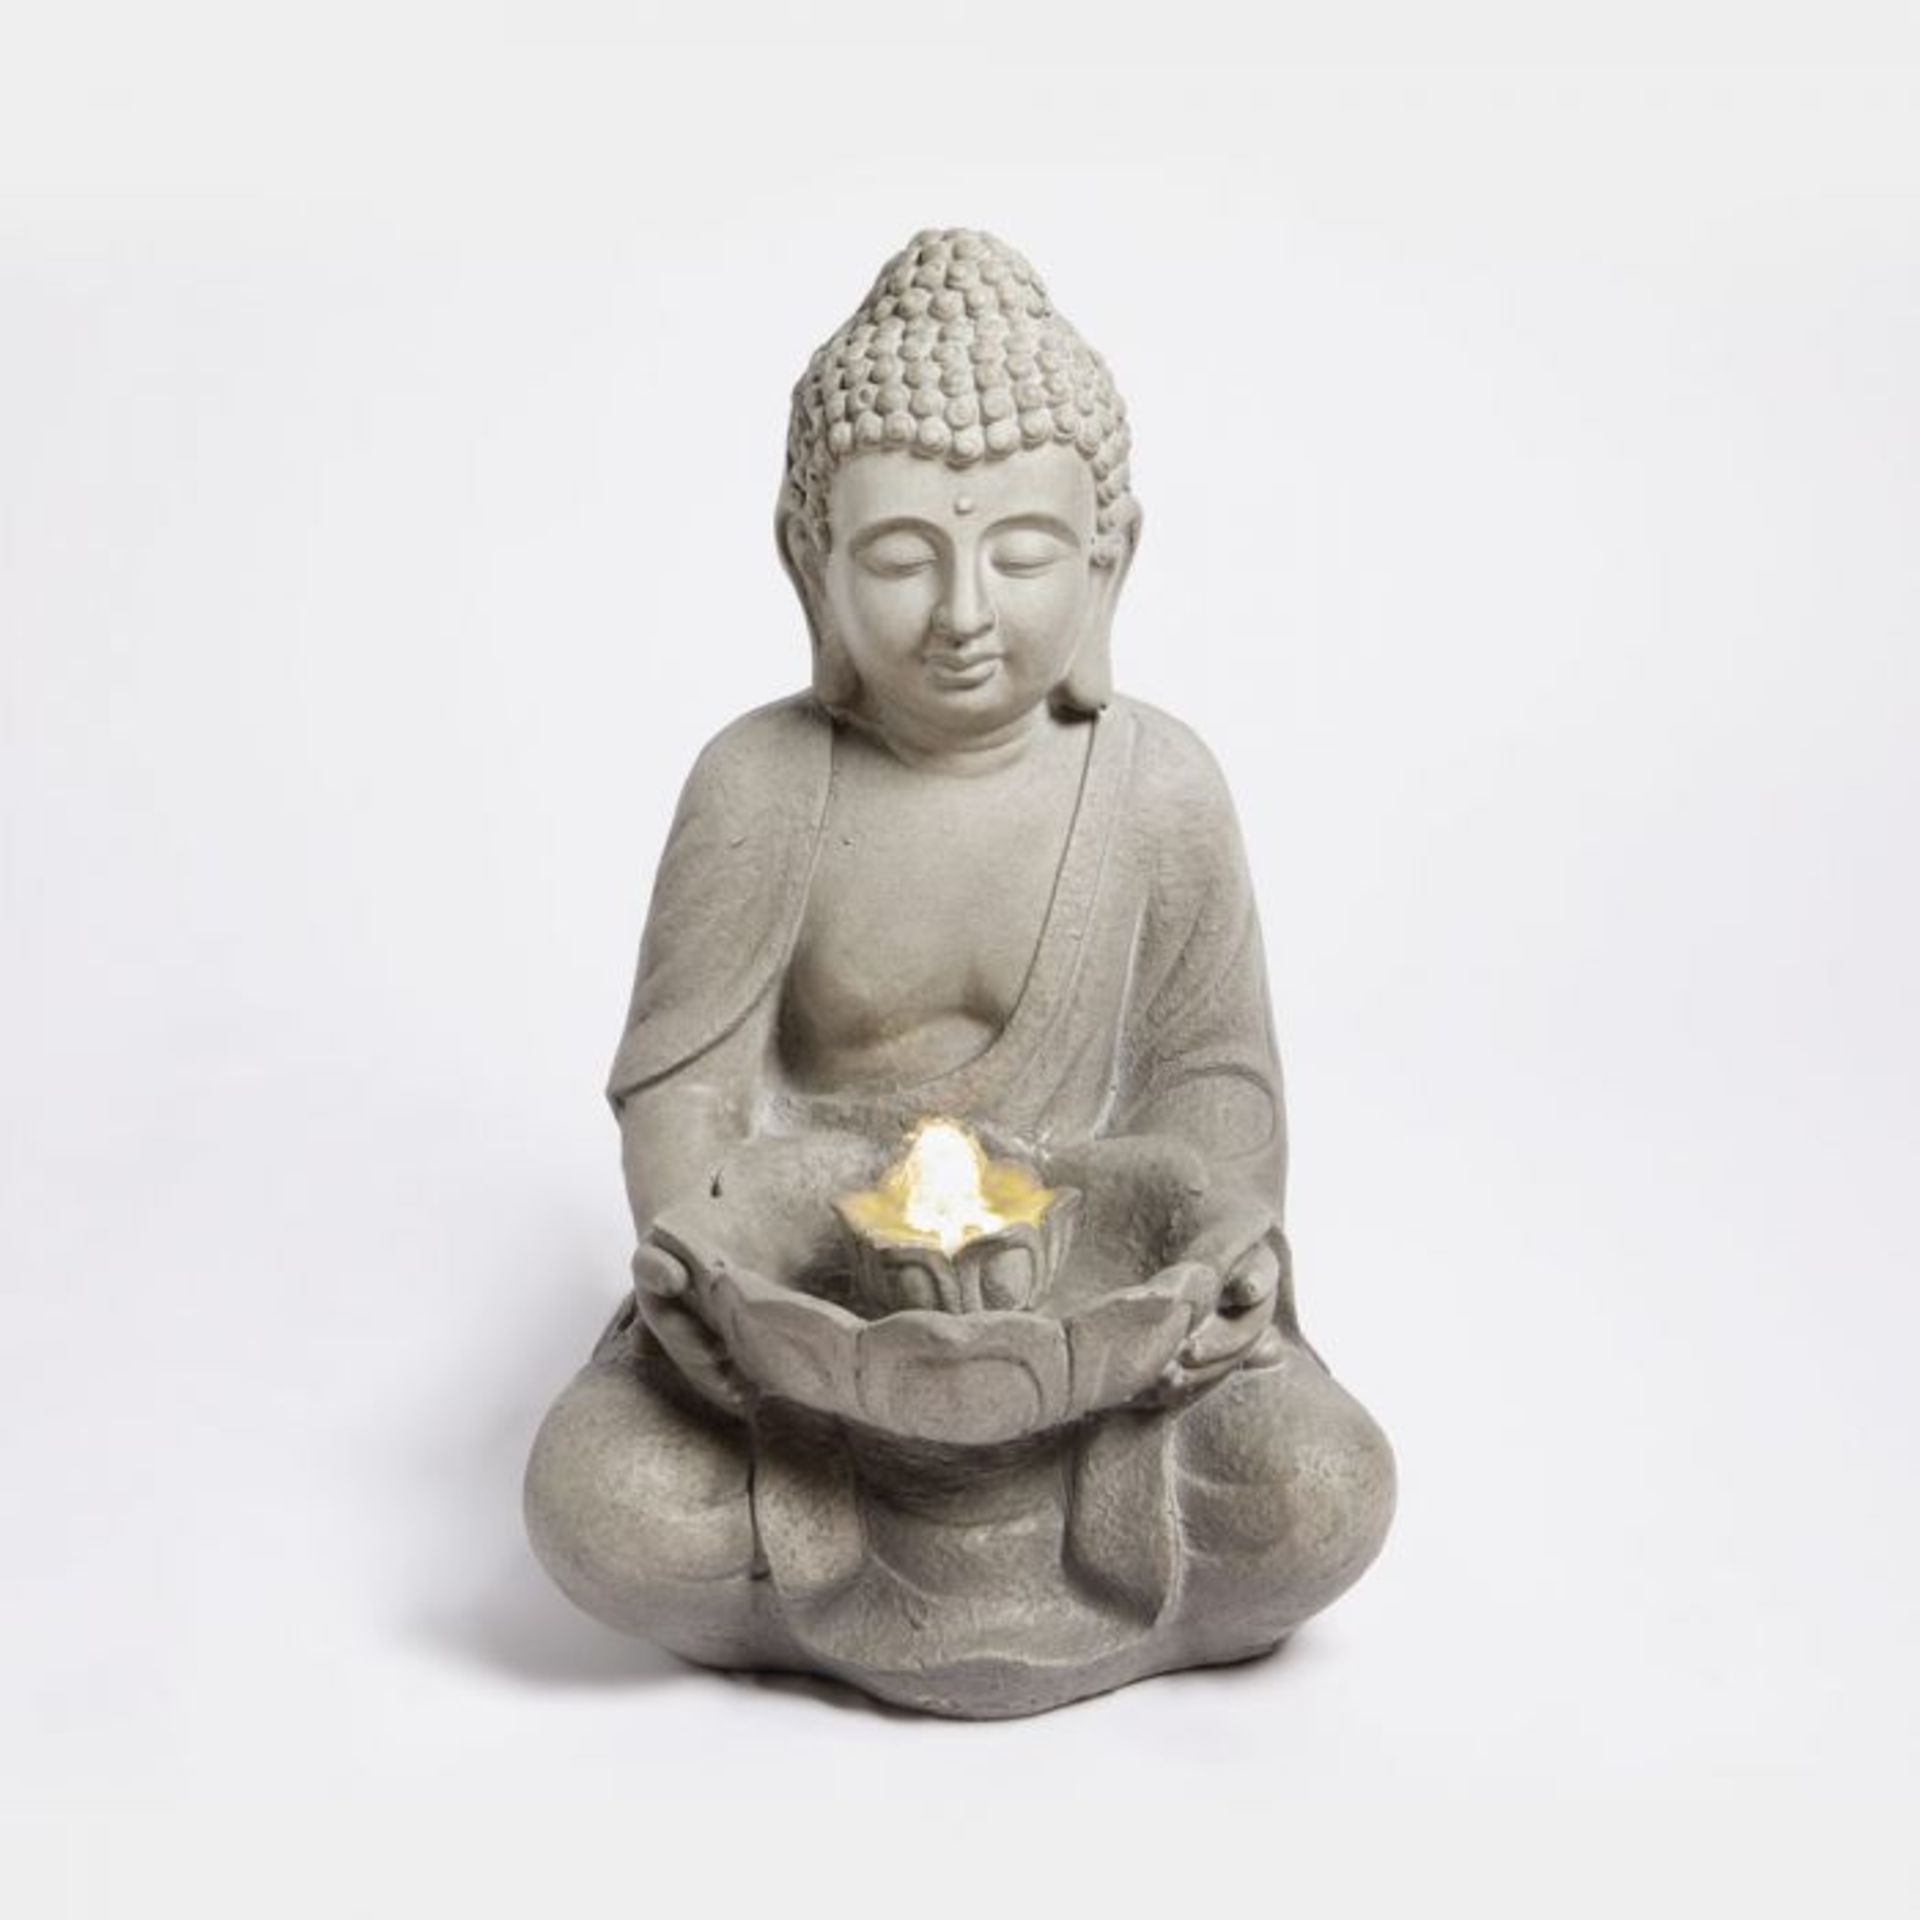 NEW BOXED Buddha Statue Water Feature. (REF606ROW15). The perfect meditation companion. Create